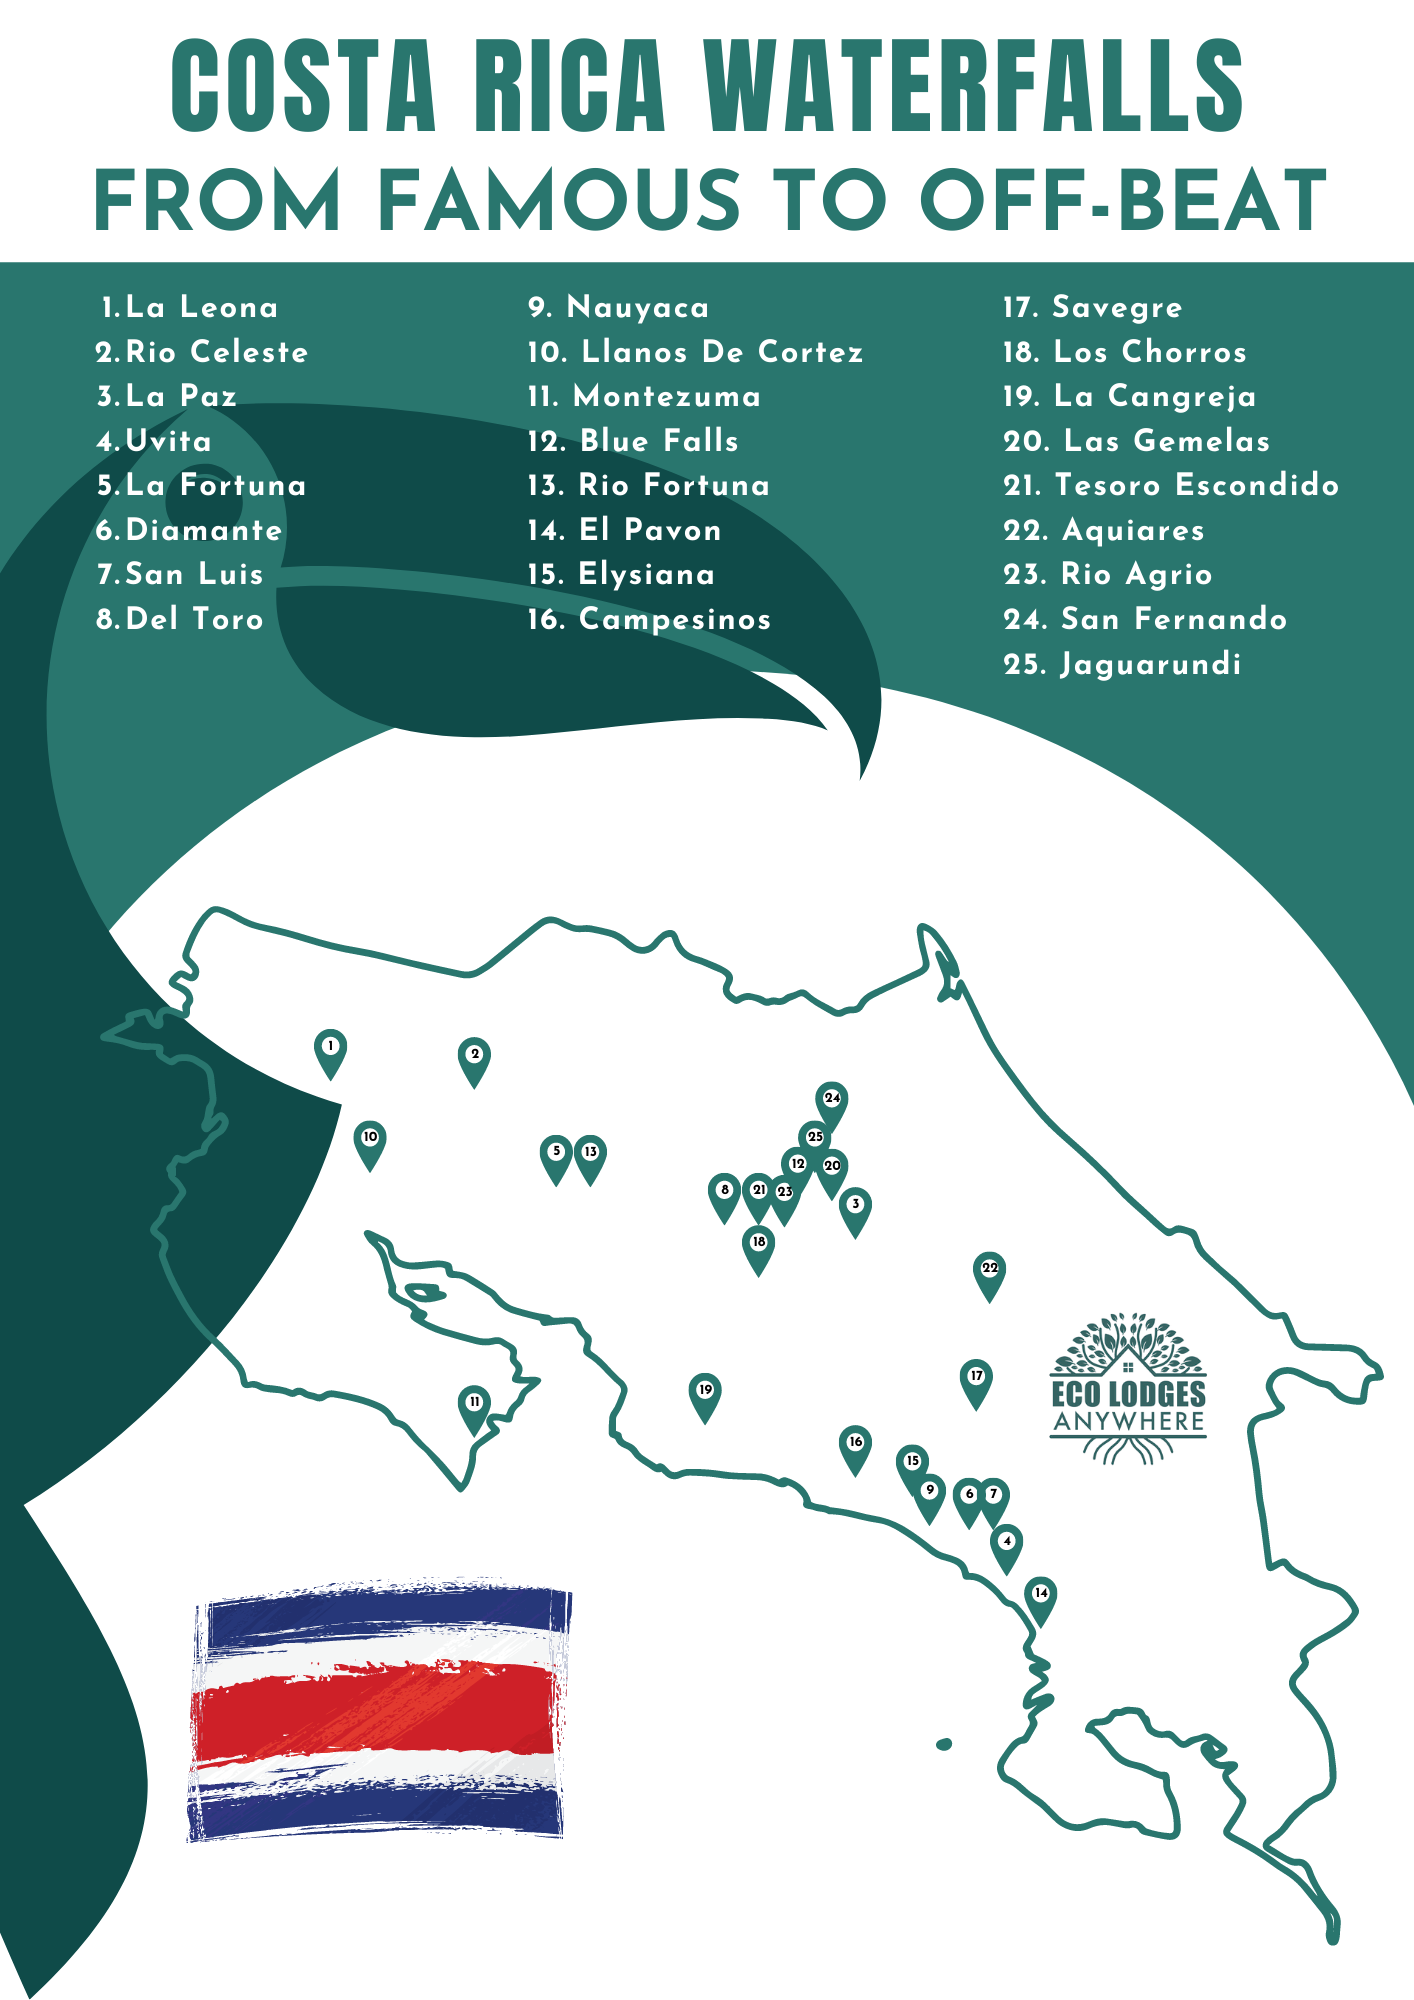 Map of Costa Rica with 25 pins locating the 25 waterfalls with the names of the waterfalls written on a list. There is a toucan silhouette in the background and the flag of Costa Rica